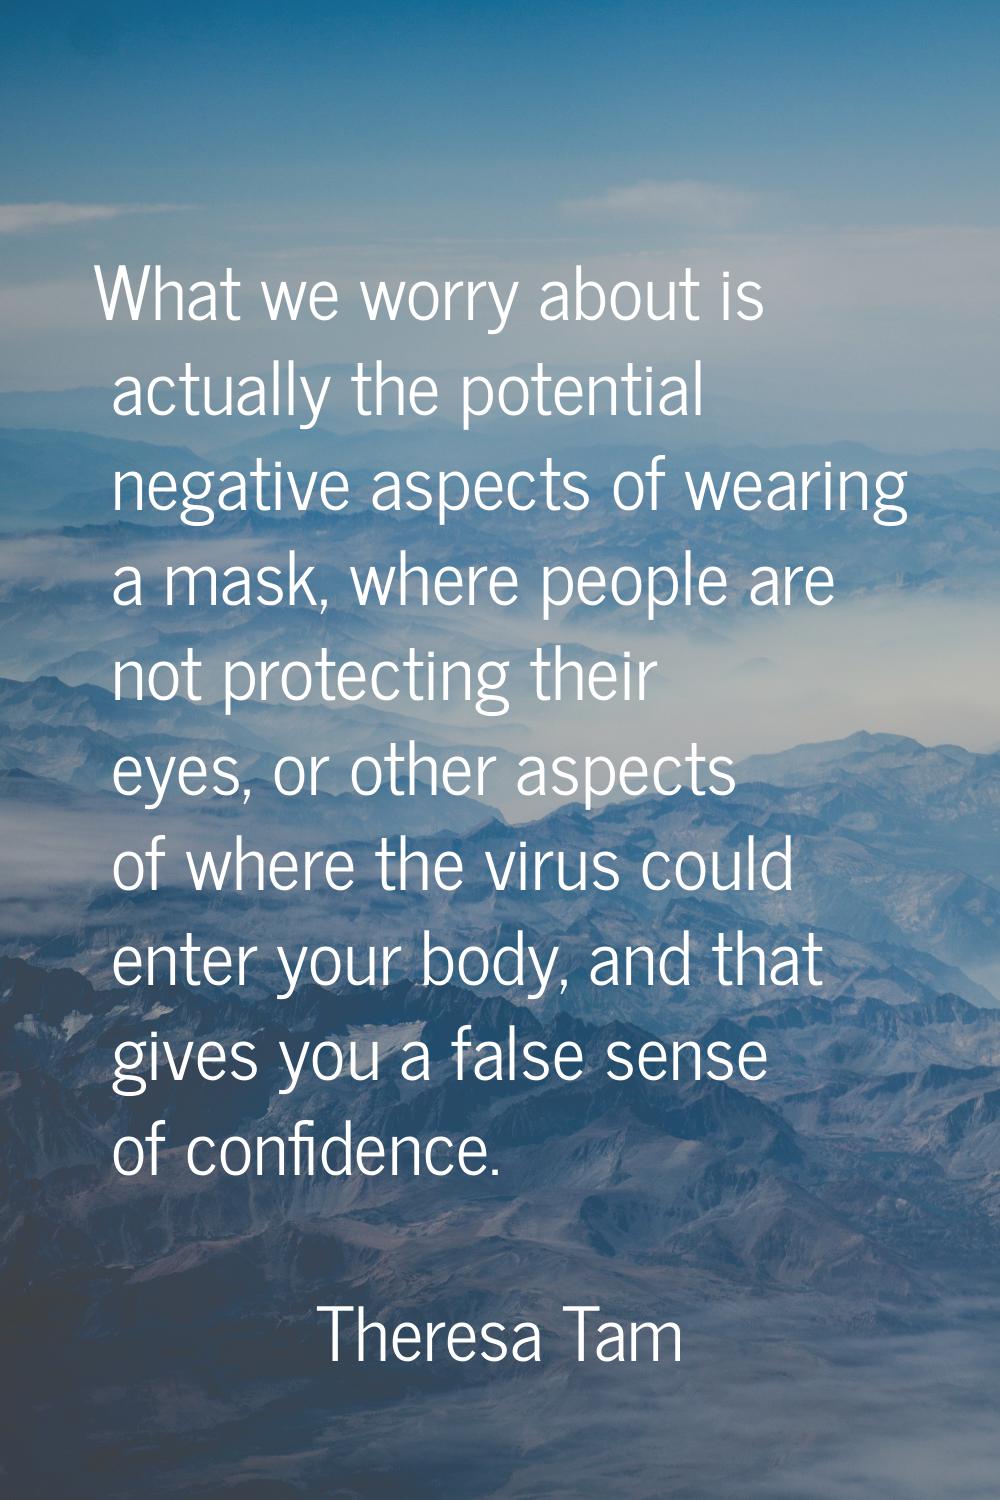 What we worry about is actually the potential negative aspects of wearing a mask, where people are 